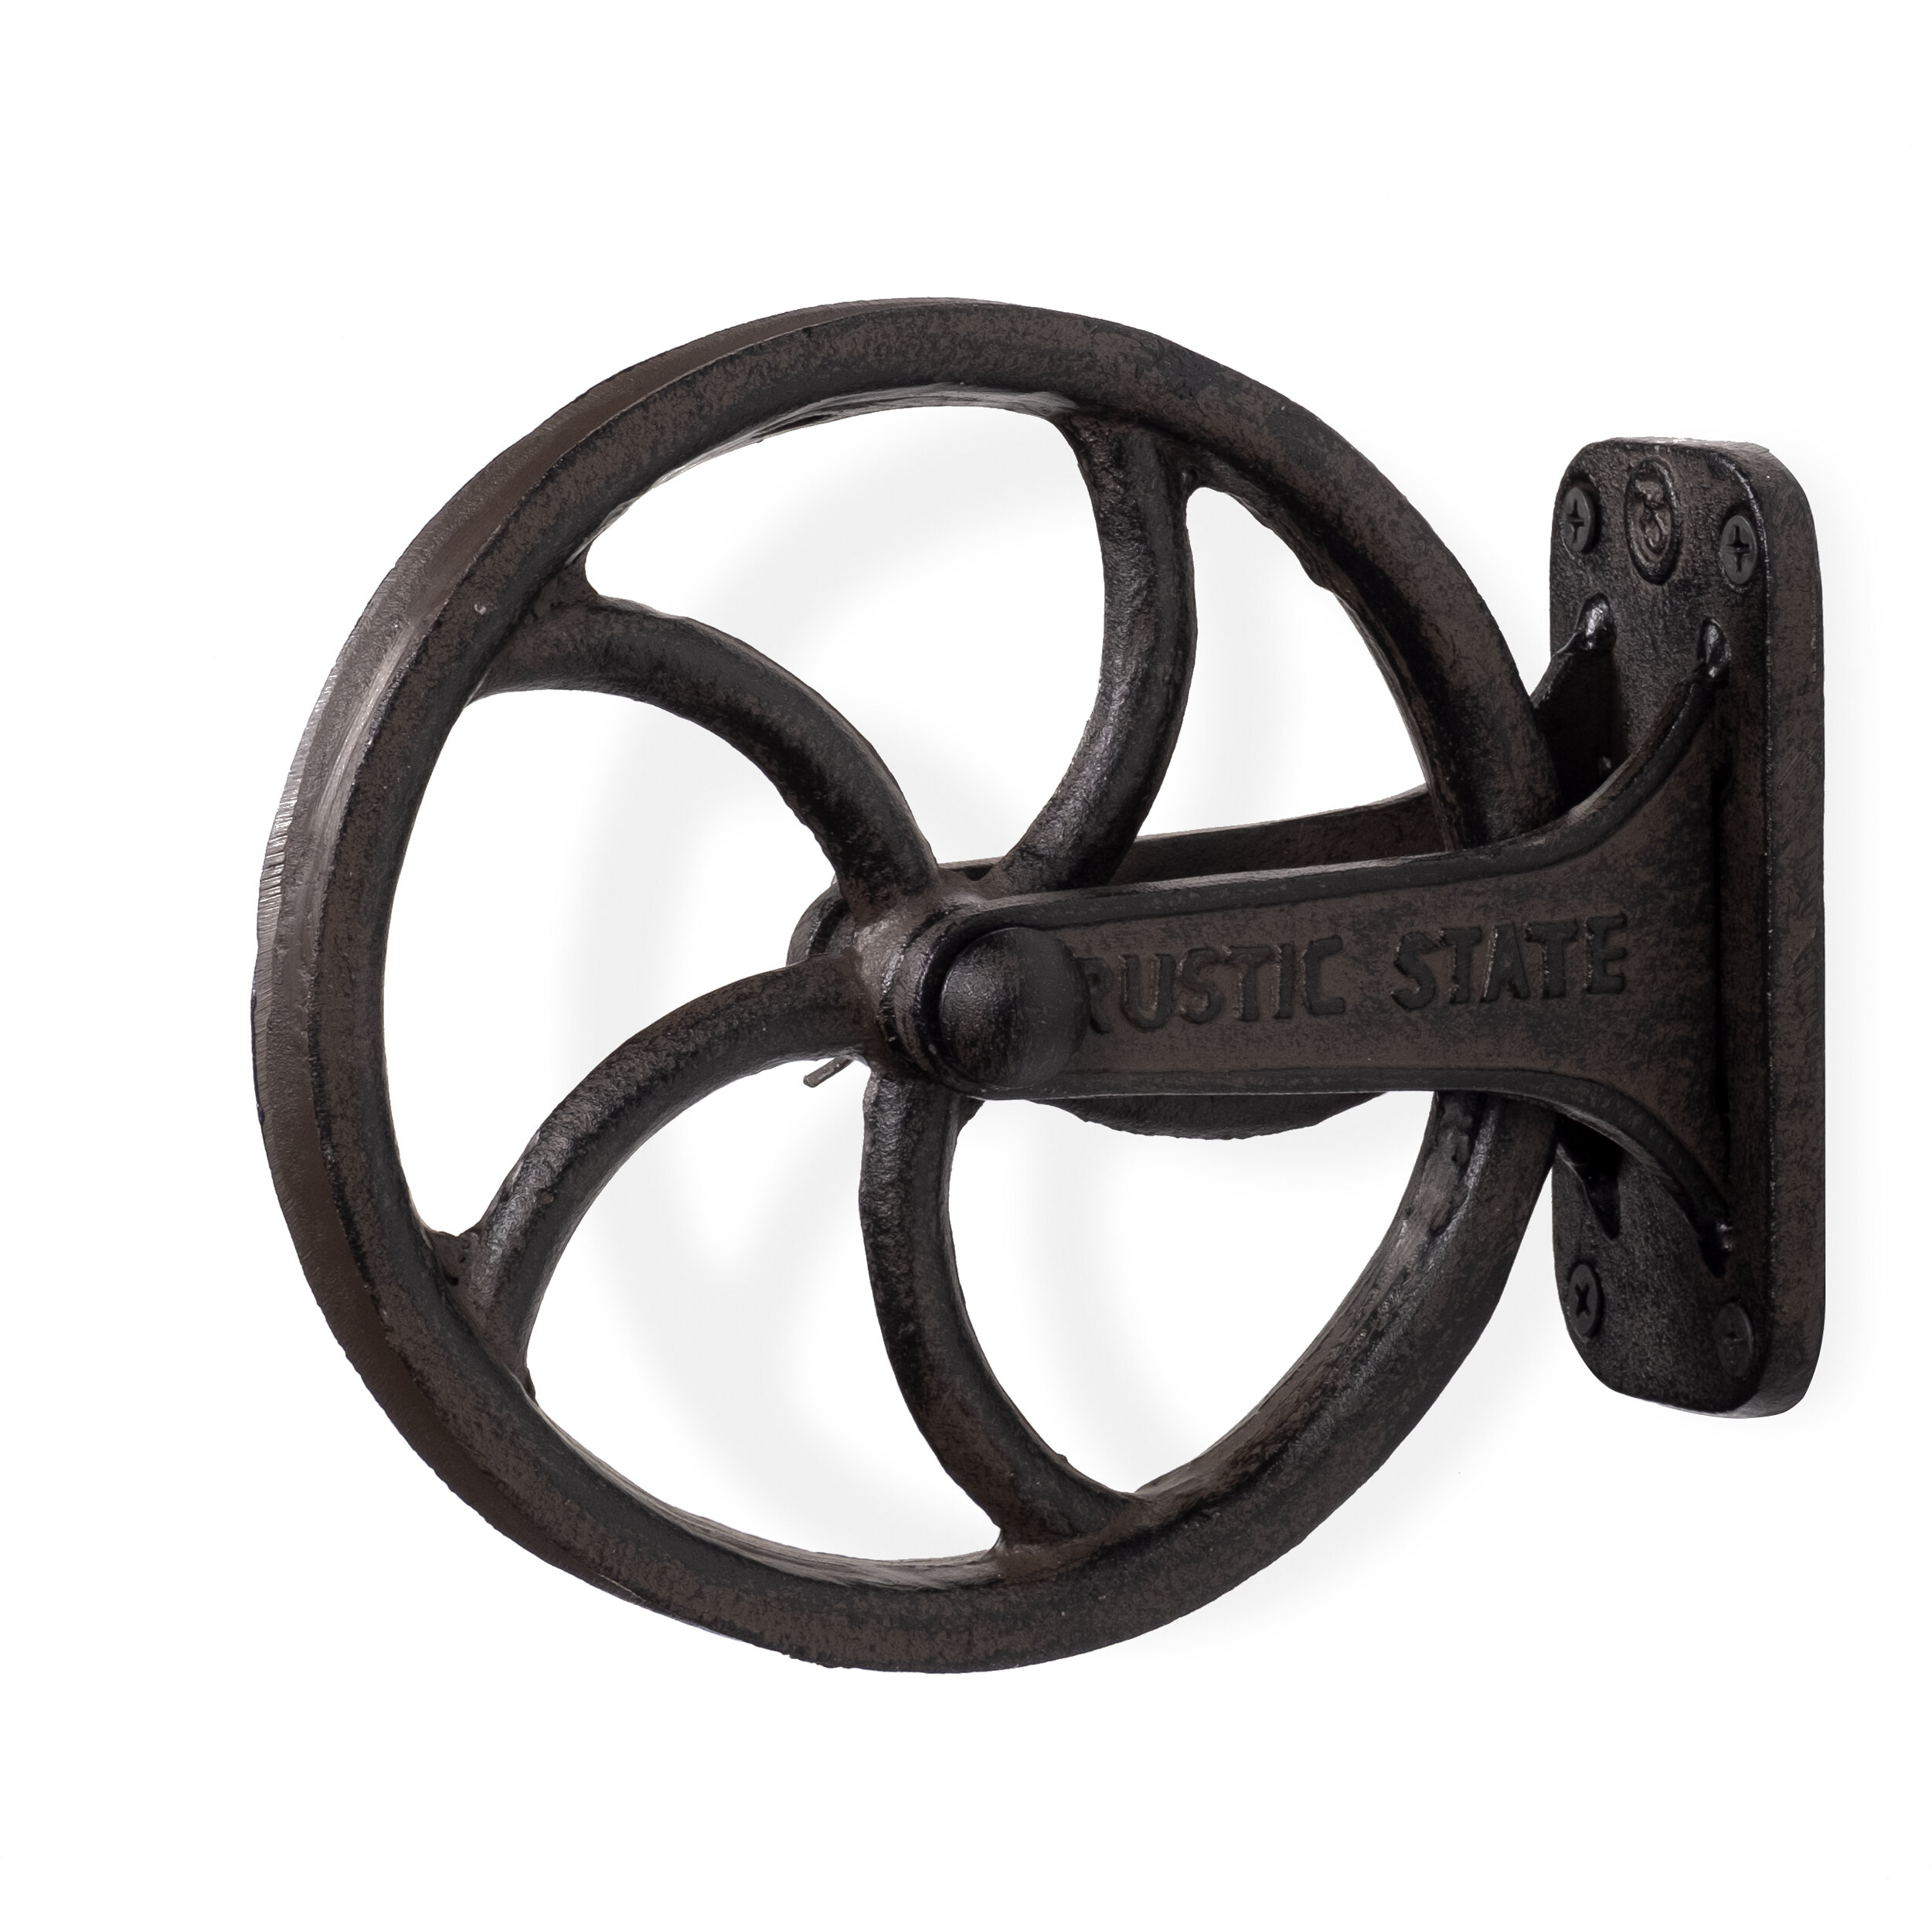 Rustic State State Halat Wall Mount Pull Chain Wayfair Canada